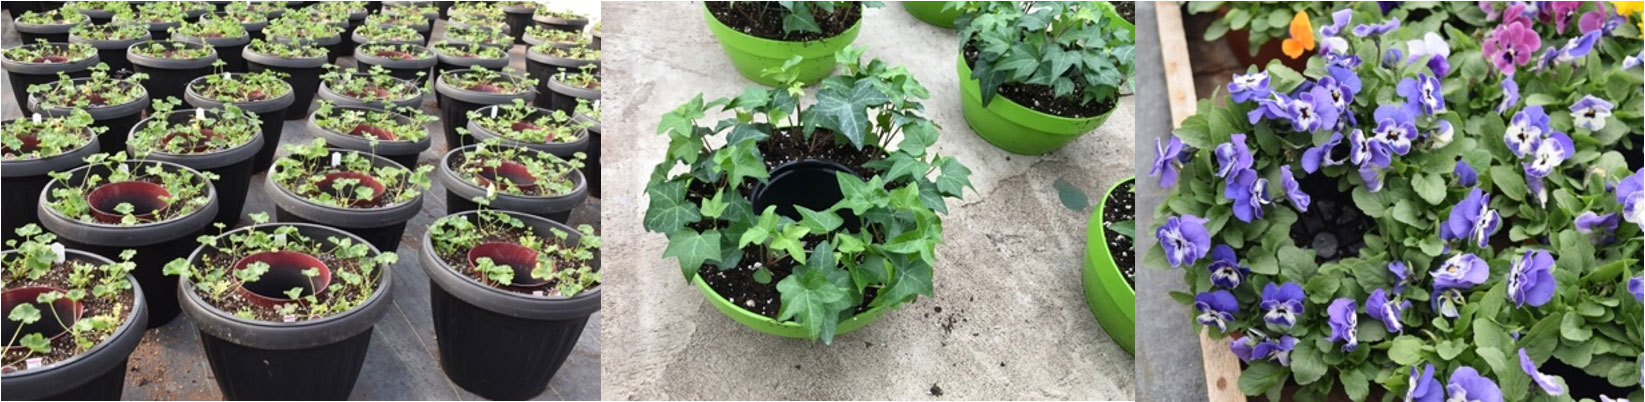 containers planted with geraniums